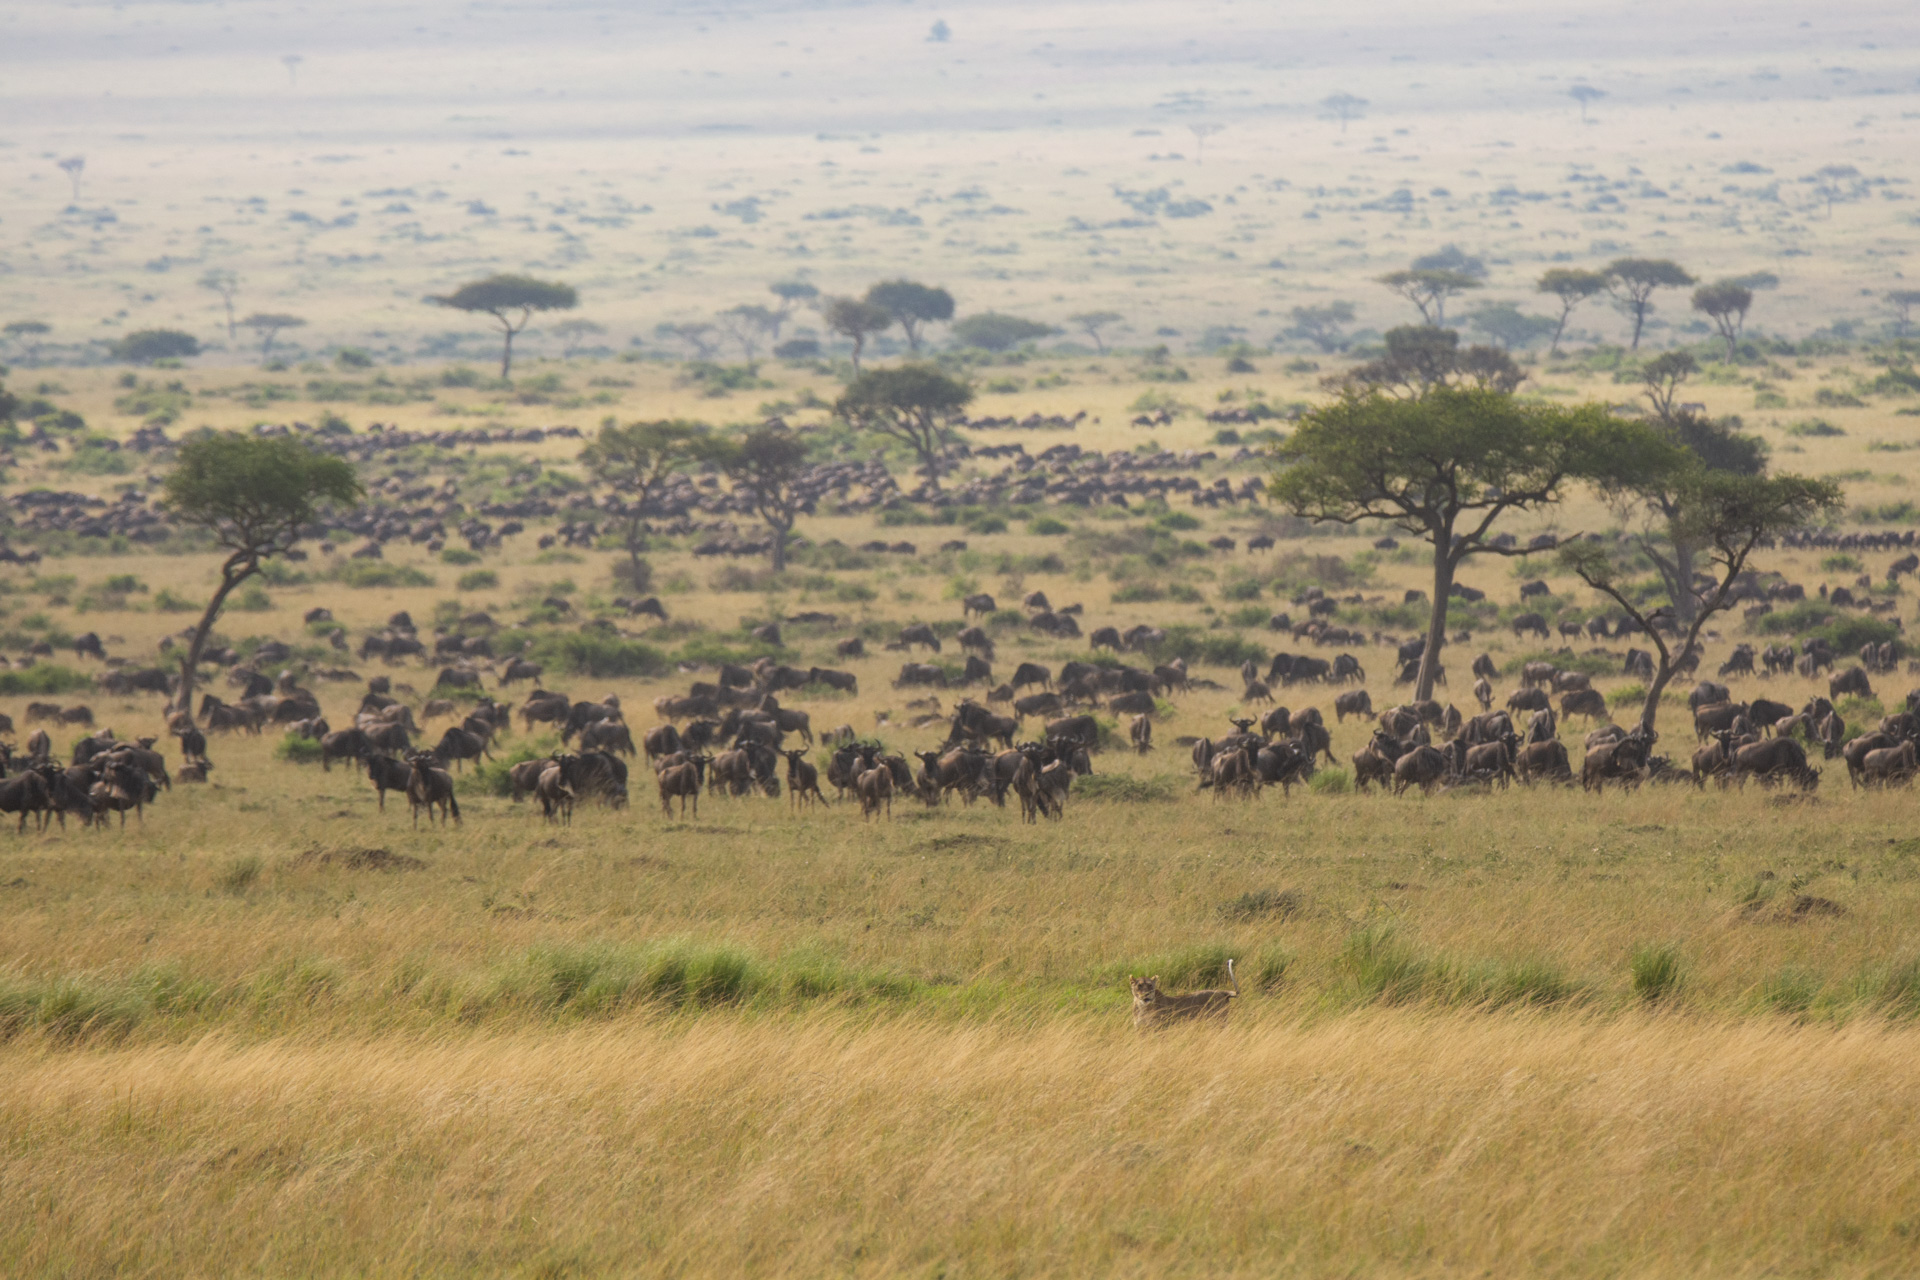 Lioness and wildebeests